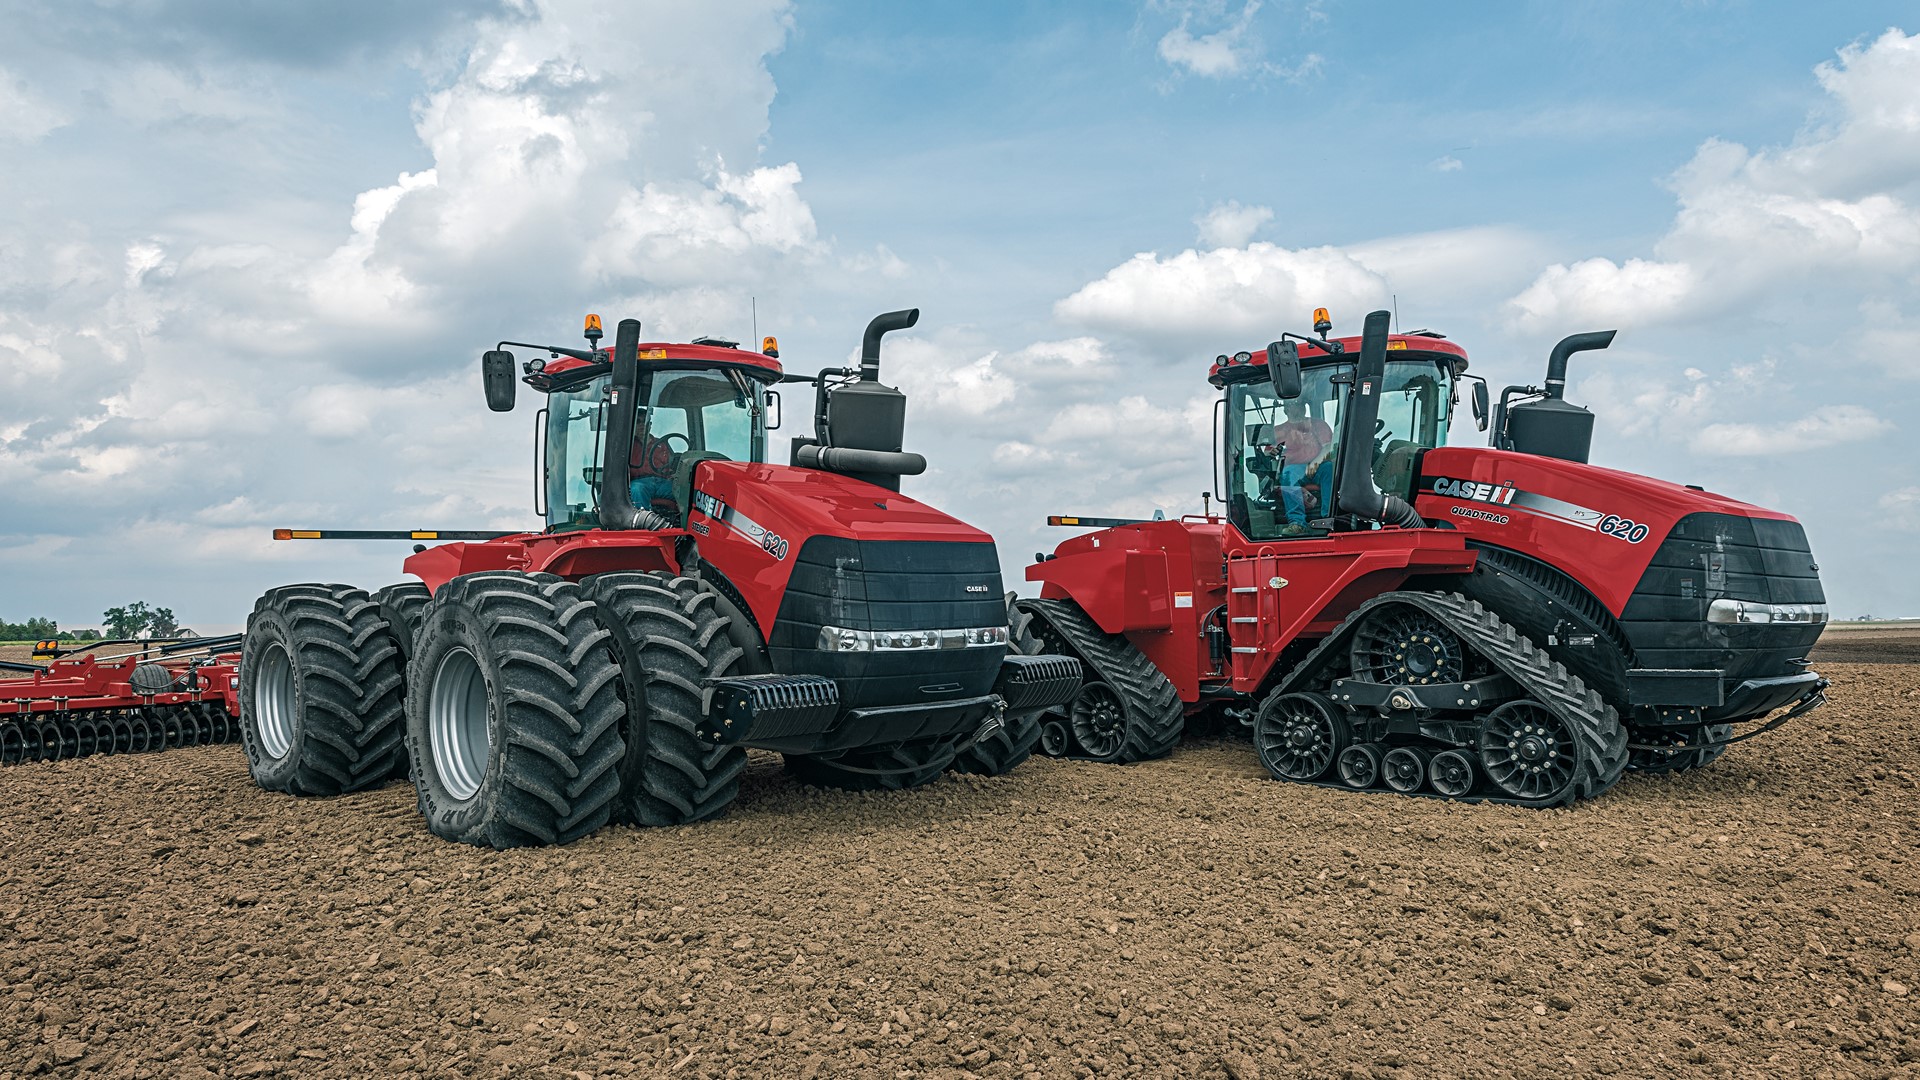 In newly released Nebraska Tractor Test Laboratory results, the Steiger® 620 tractor sets new performance records